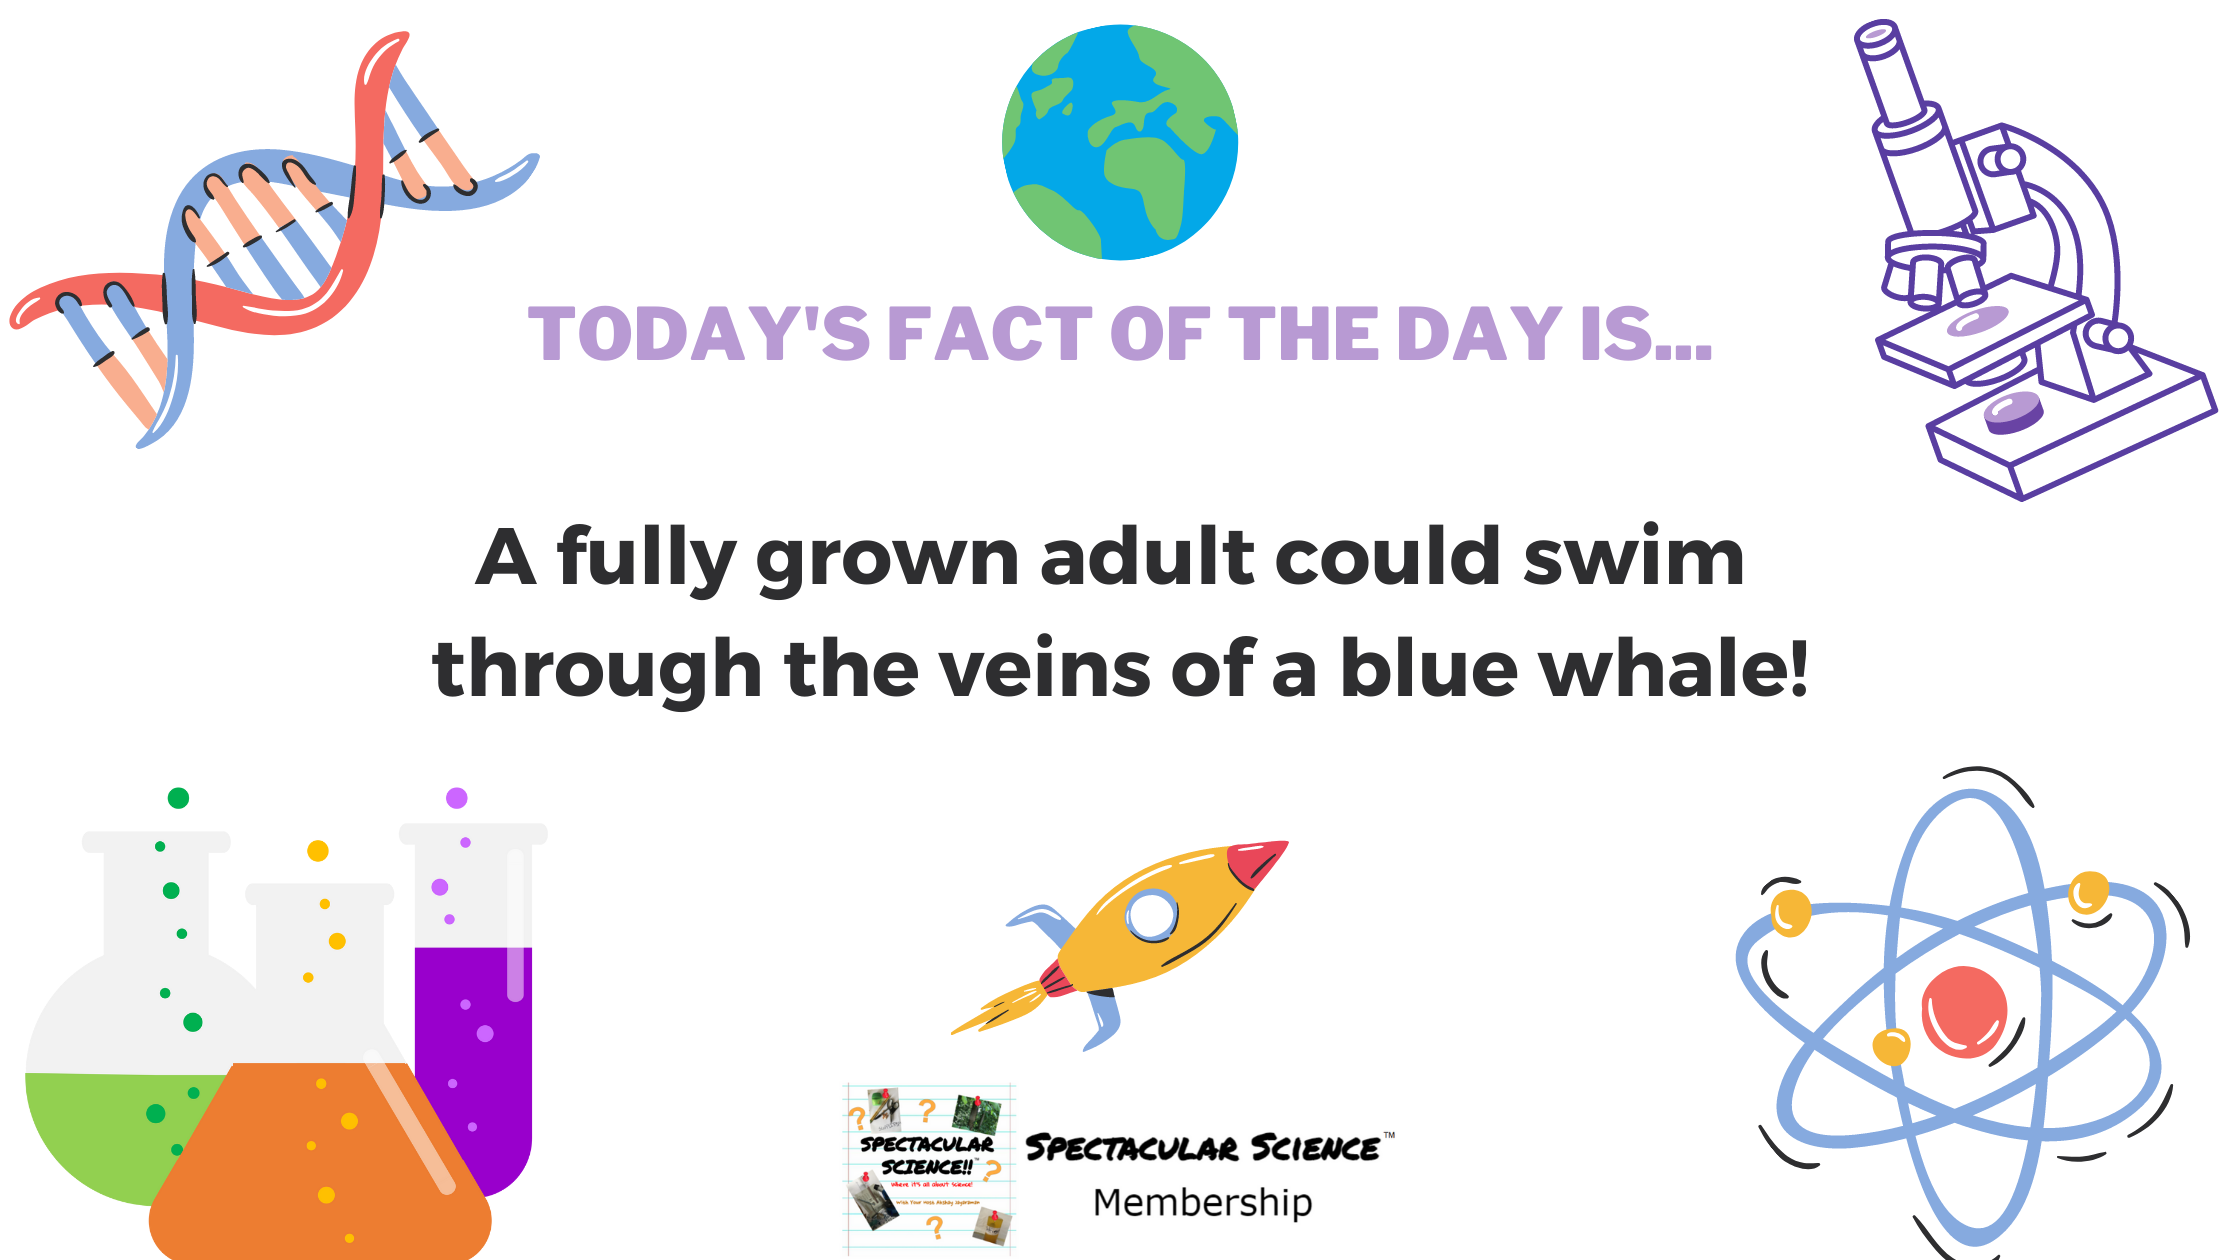 Fact of the Day Image Mar. 11th